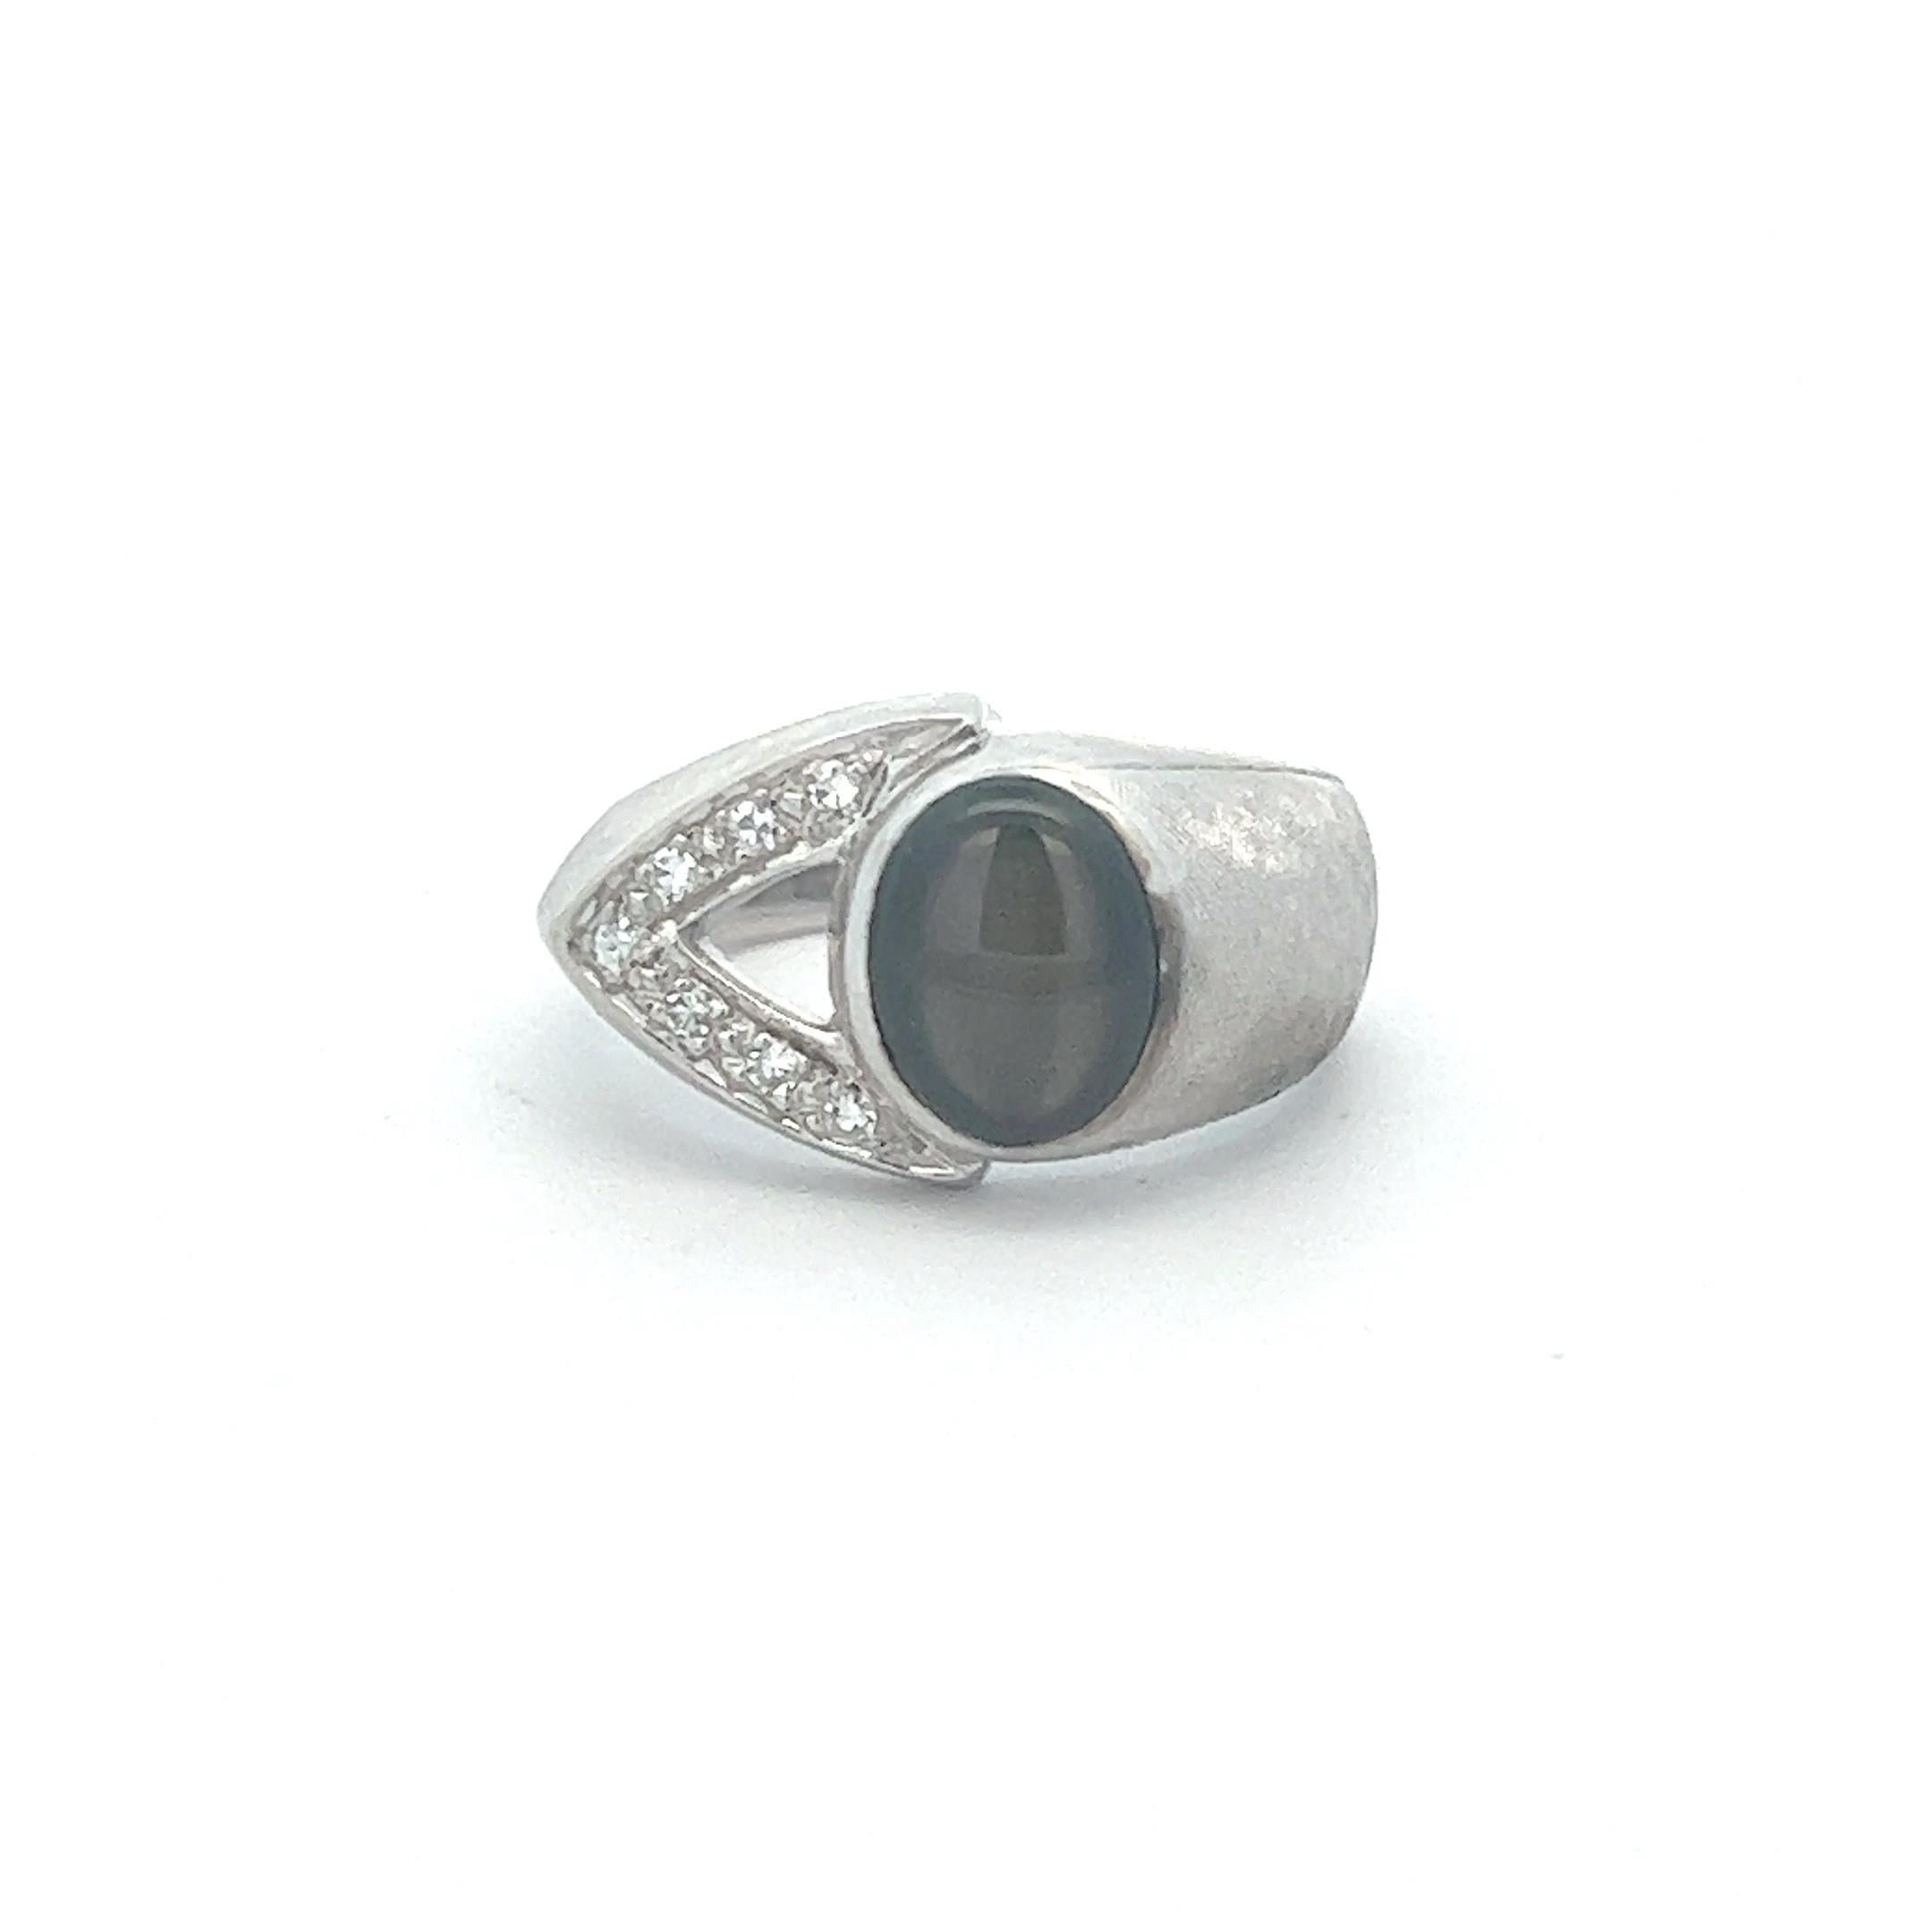 A distinctive modern ring crafted of textured 14k white gold featuring a remarkable black star sapphire with diamonds. The sapphire weighs approximately 2.5 cts and the diamonds are approximately 0.07 ctw (both measurements taken in setting). 